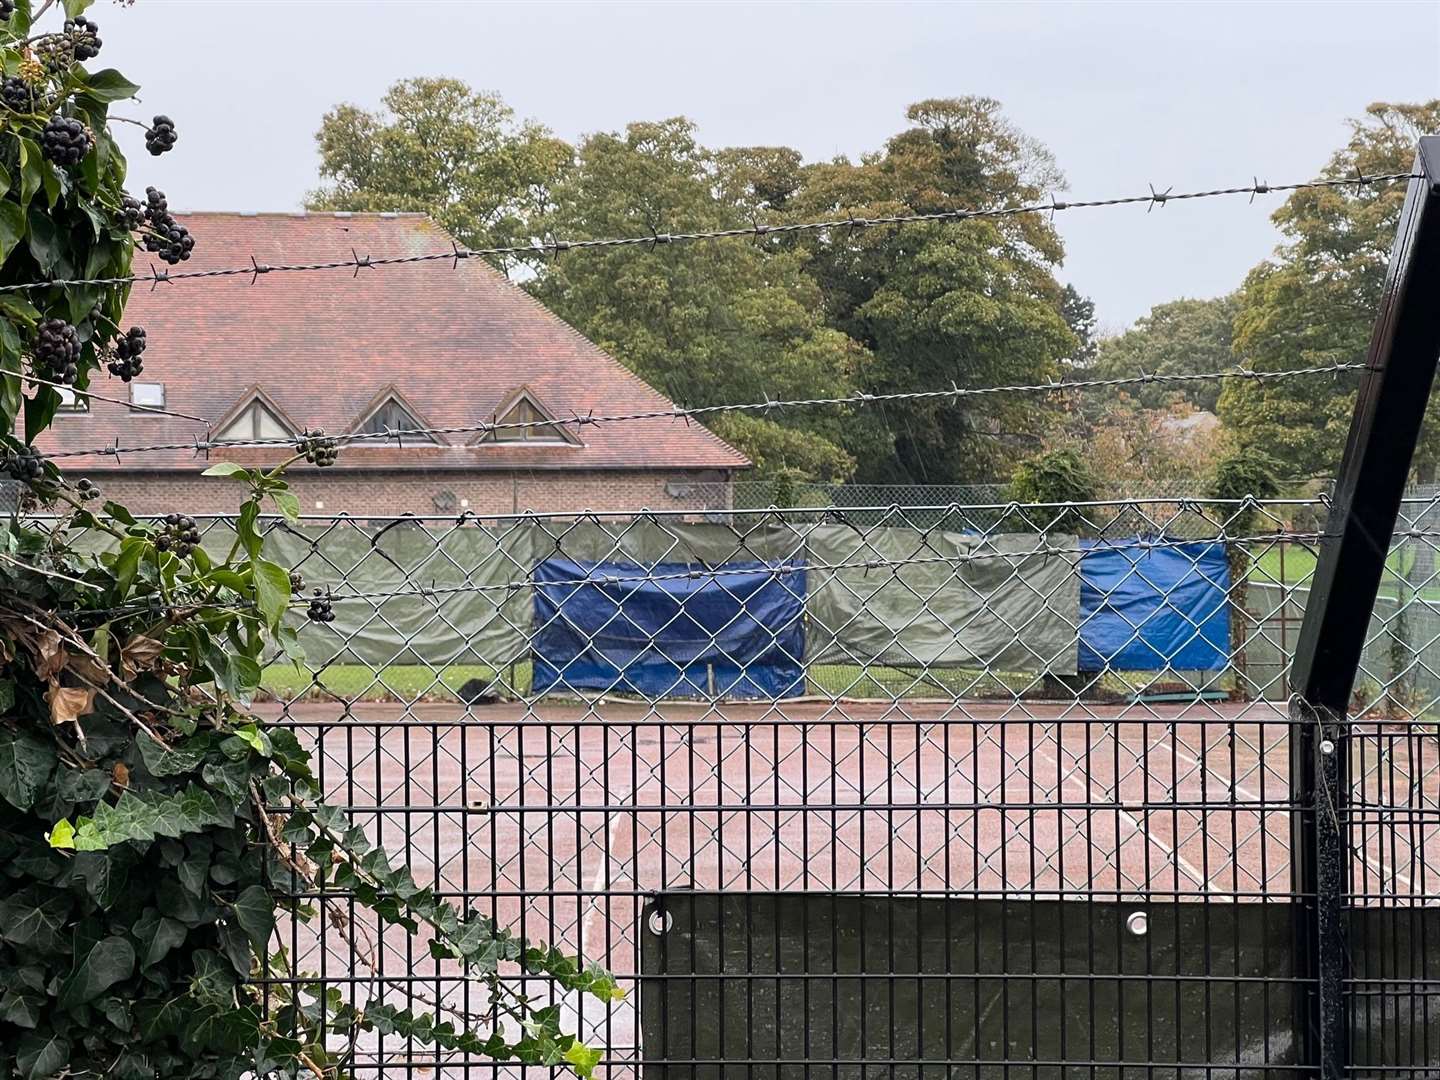 Manston immigration centre - glimpsed from behind the fences